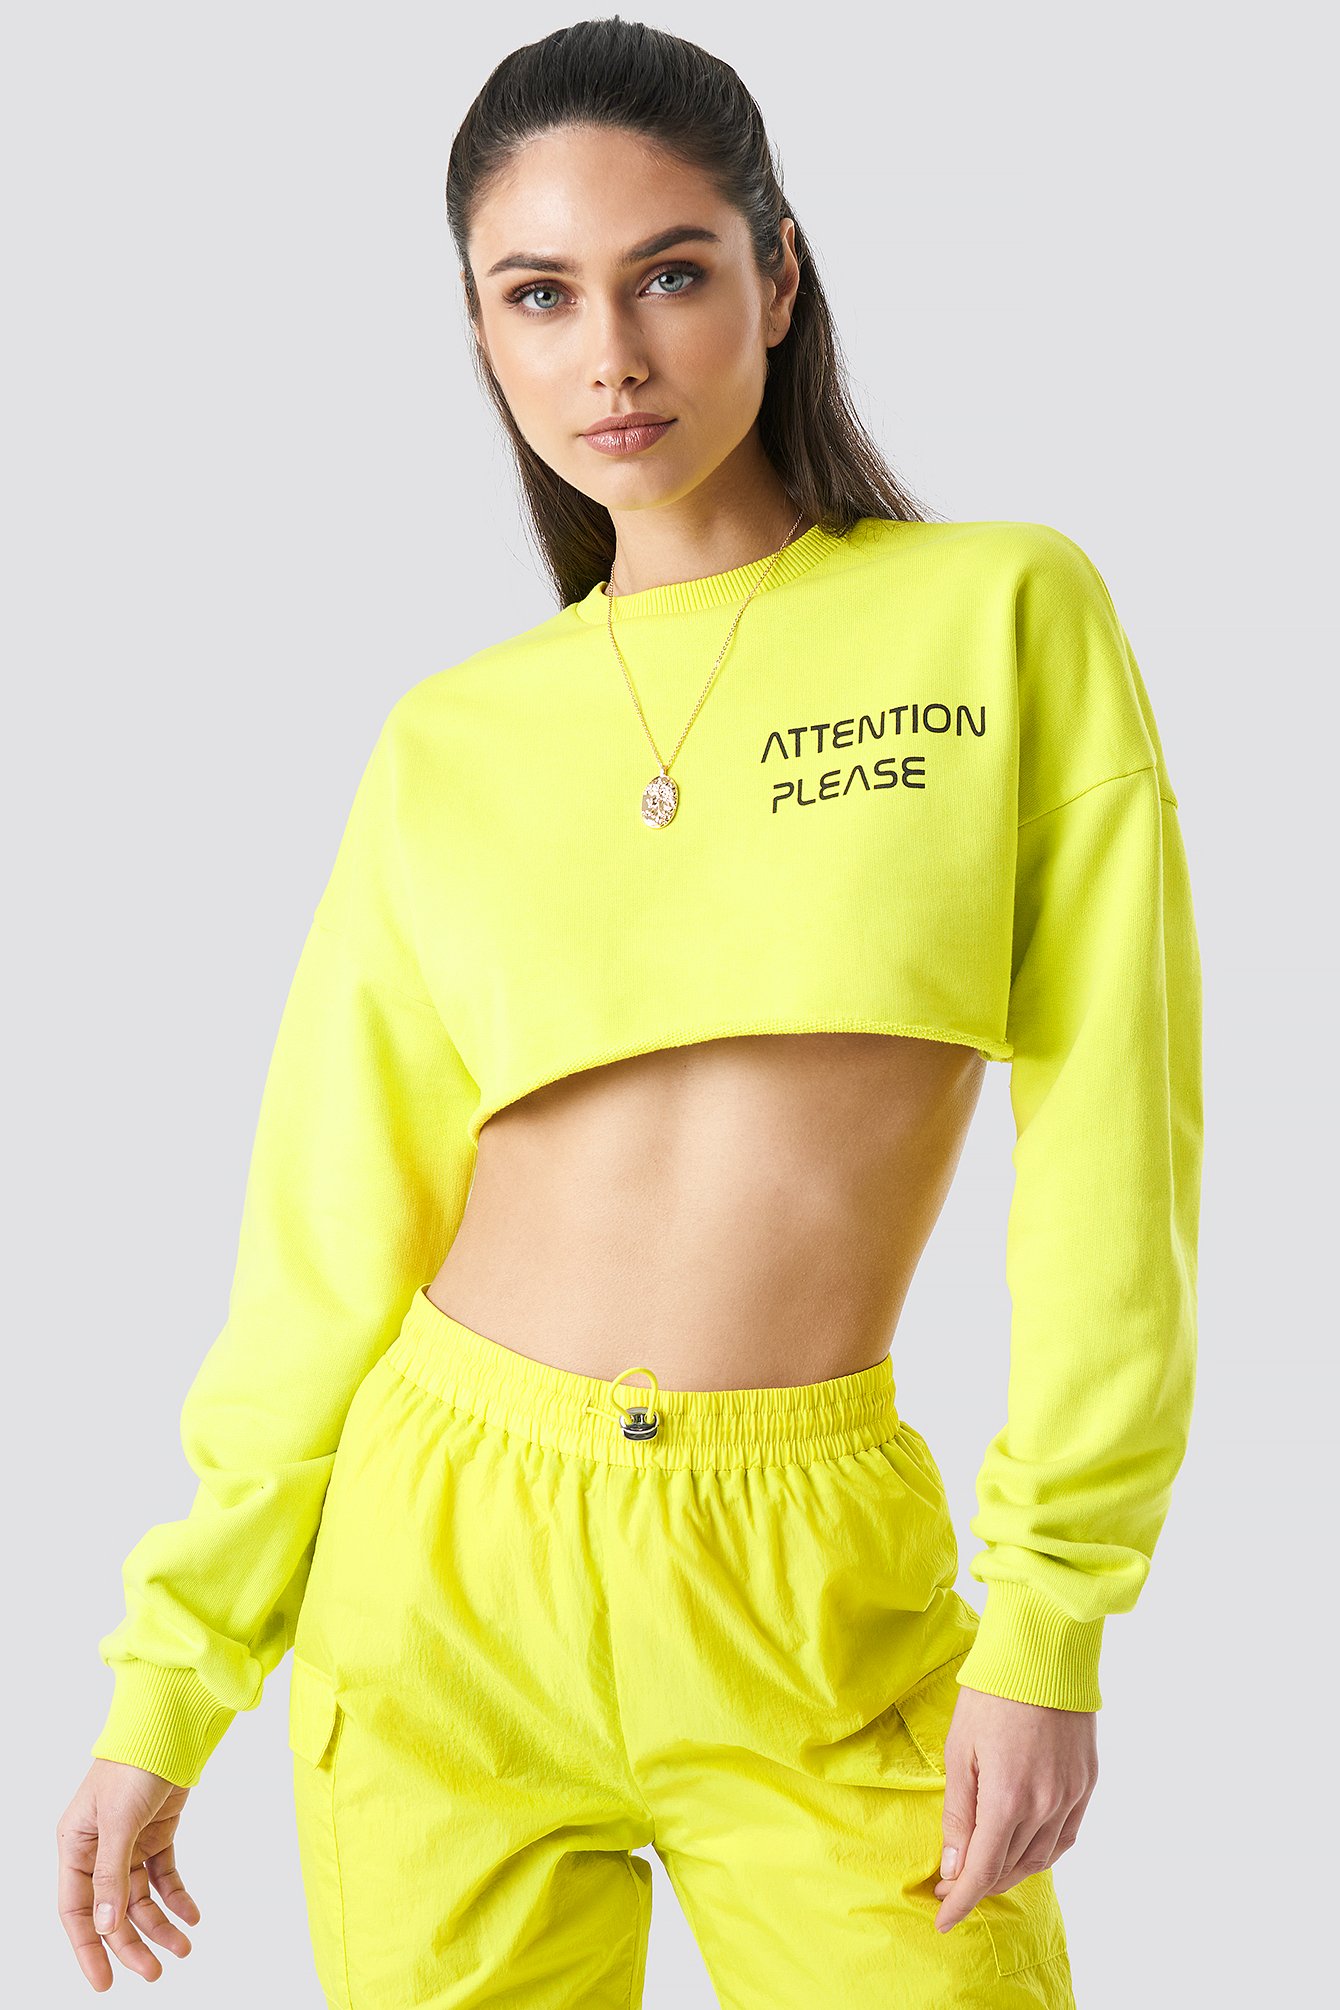 Anna Nooshin X Na-kd Attention Please Raw Cropped Sweater - Green Https://www.na-kd.com/poqcolorimages/green.png